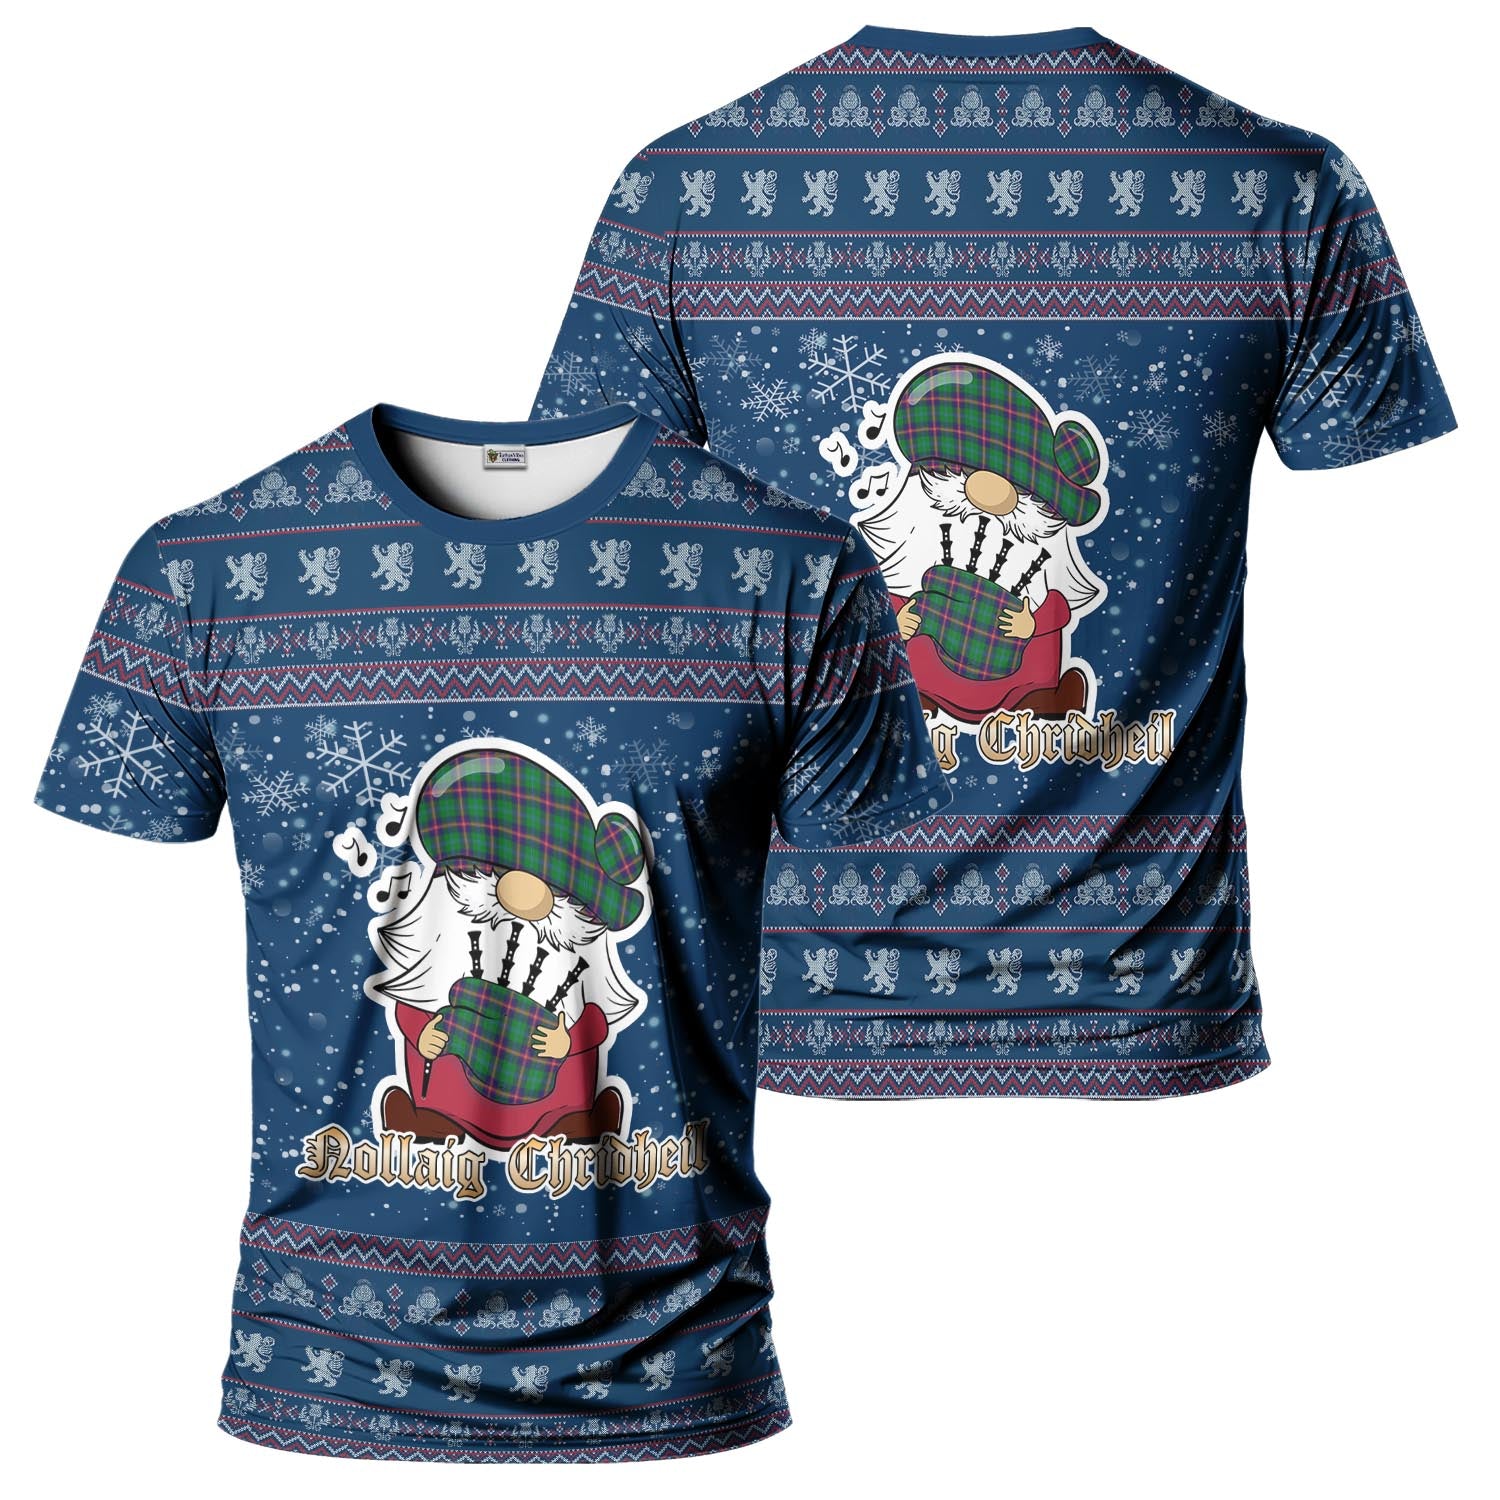 Young Modern Clan Christmas Family T-Shirt with Funny Gnome Playing Bagpipes Kid's Shirt Blue - Tartanvibesclothing